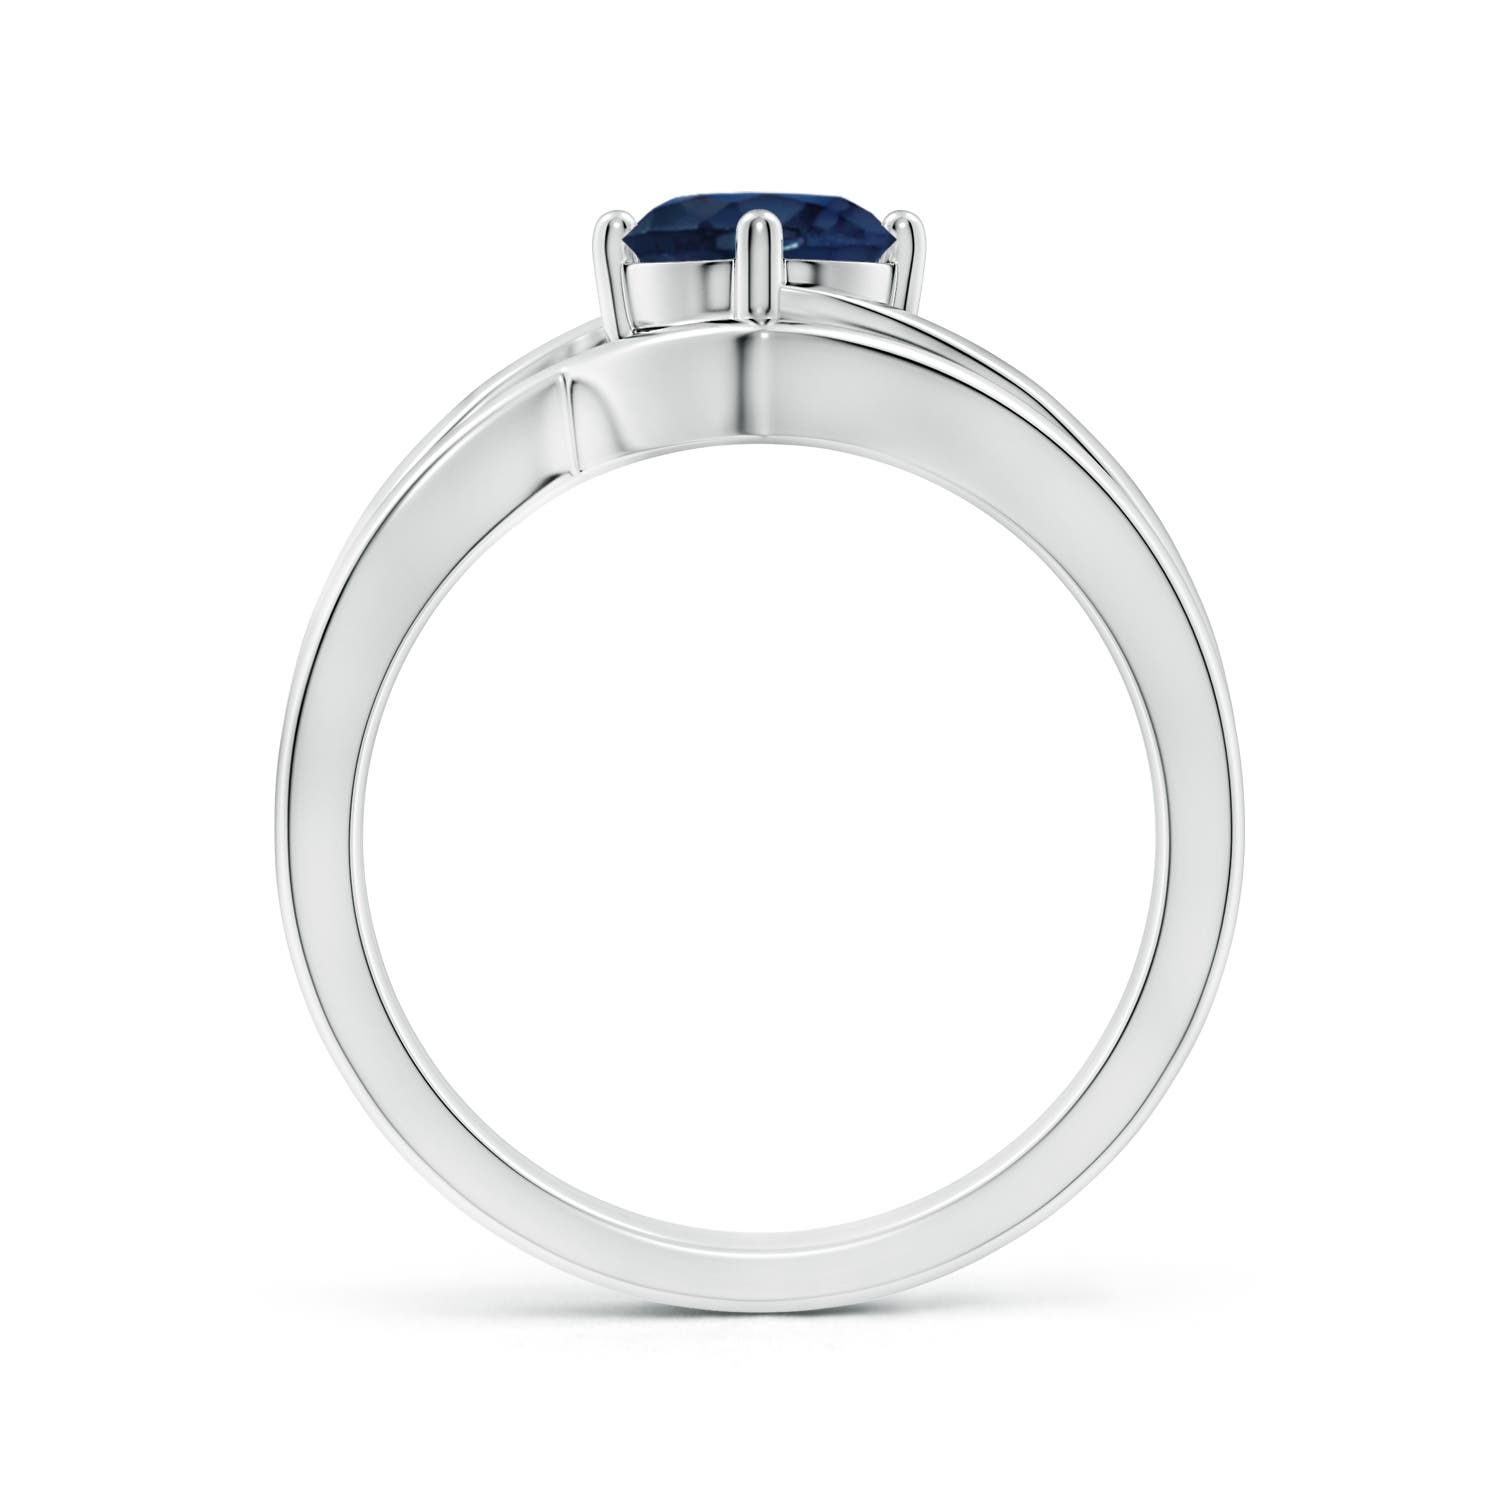 AA - Blue Sapphire / 1 CT / 14 KT White Gold